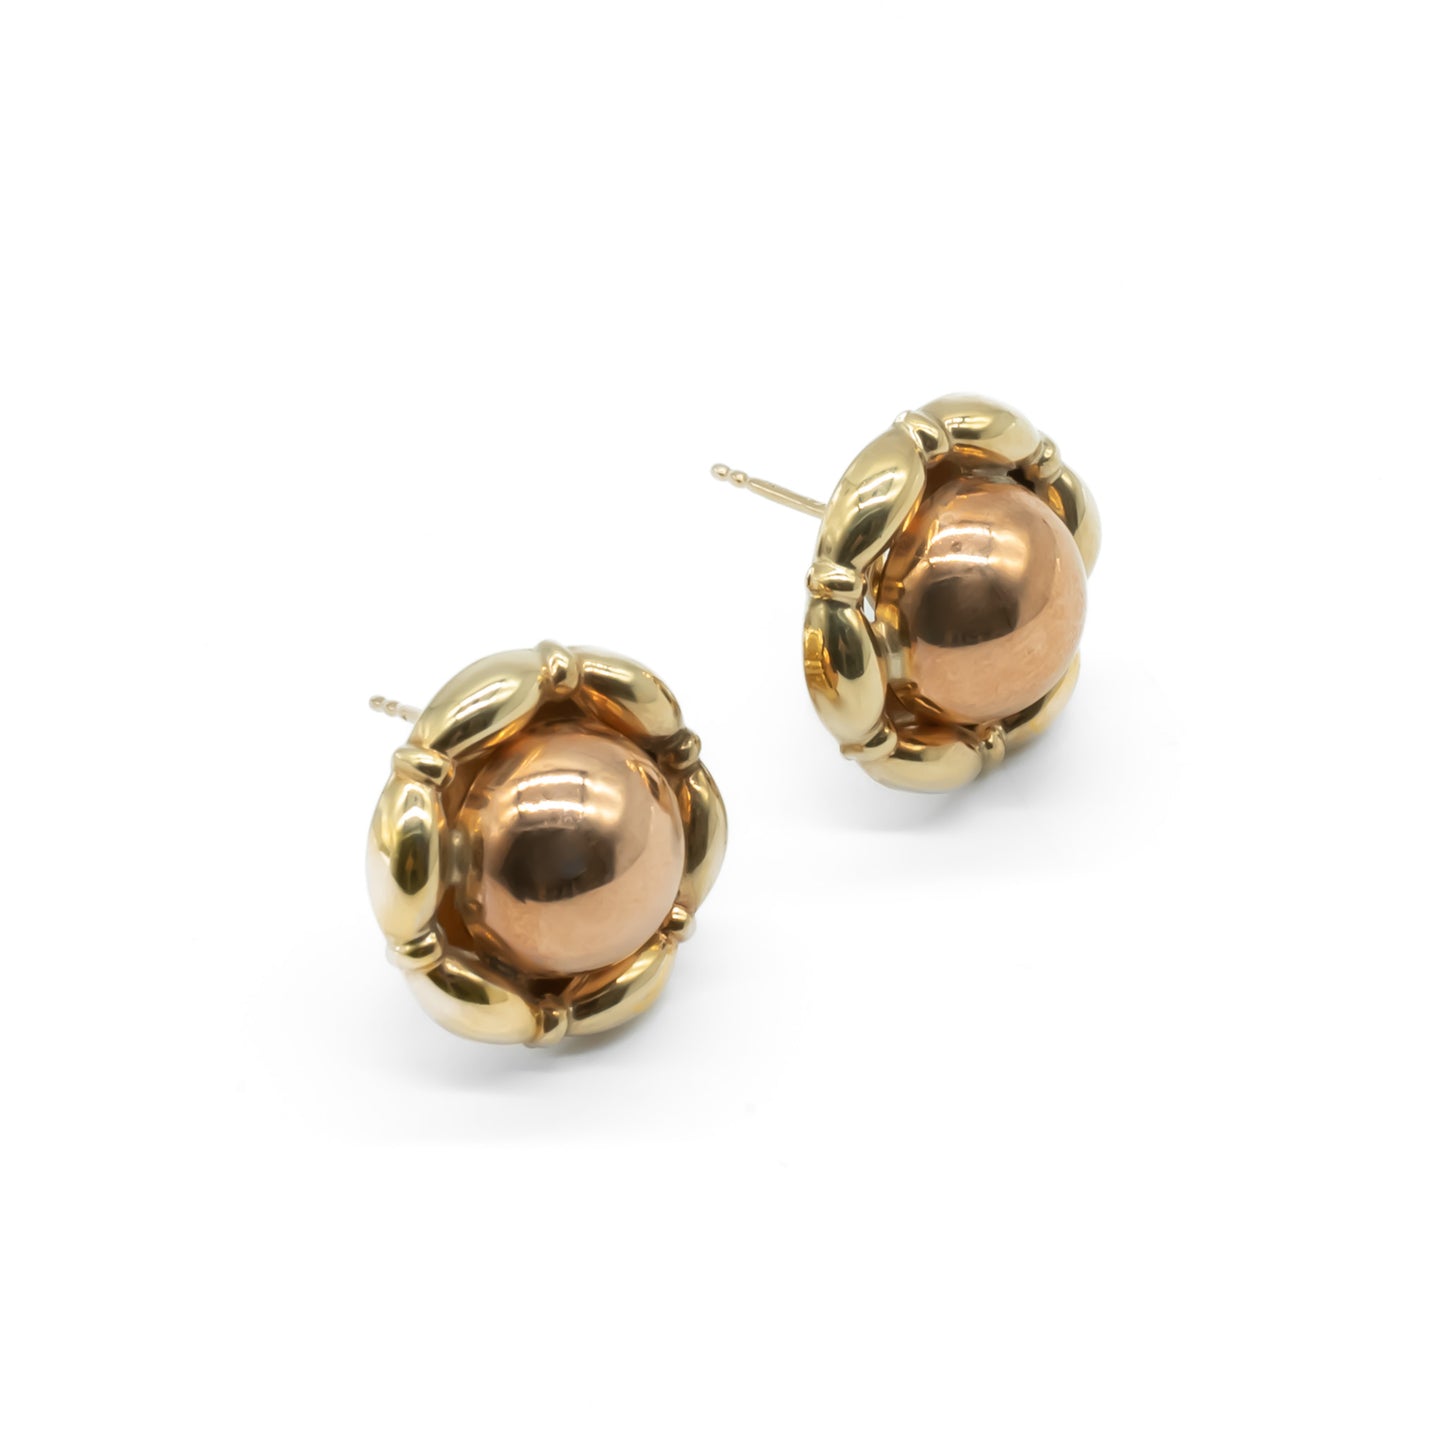 Classic 9ct yellow gold stud earrings with rose gold domes in centre.